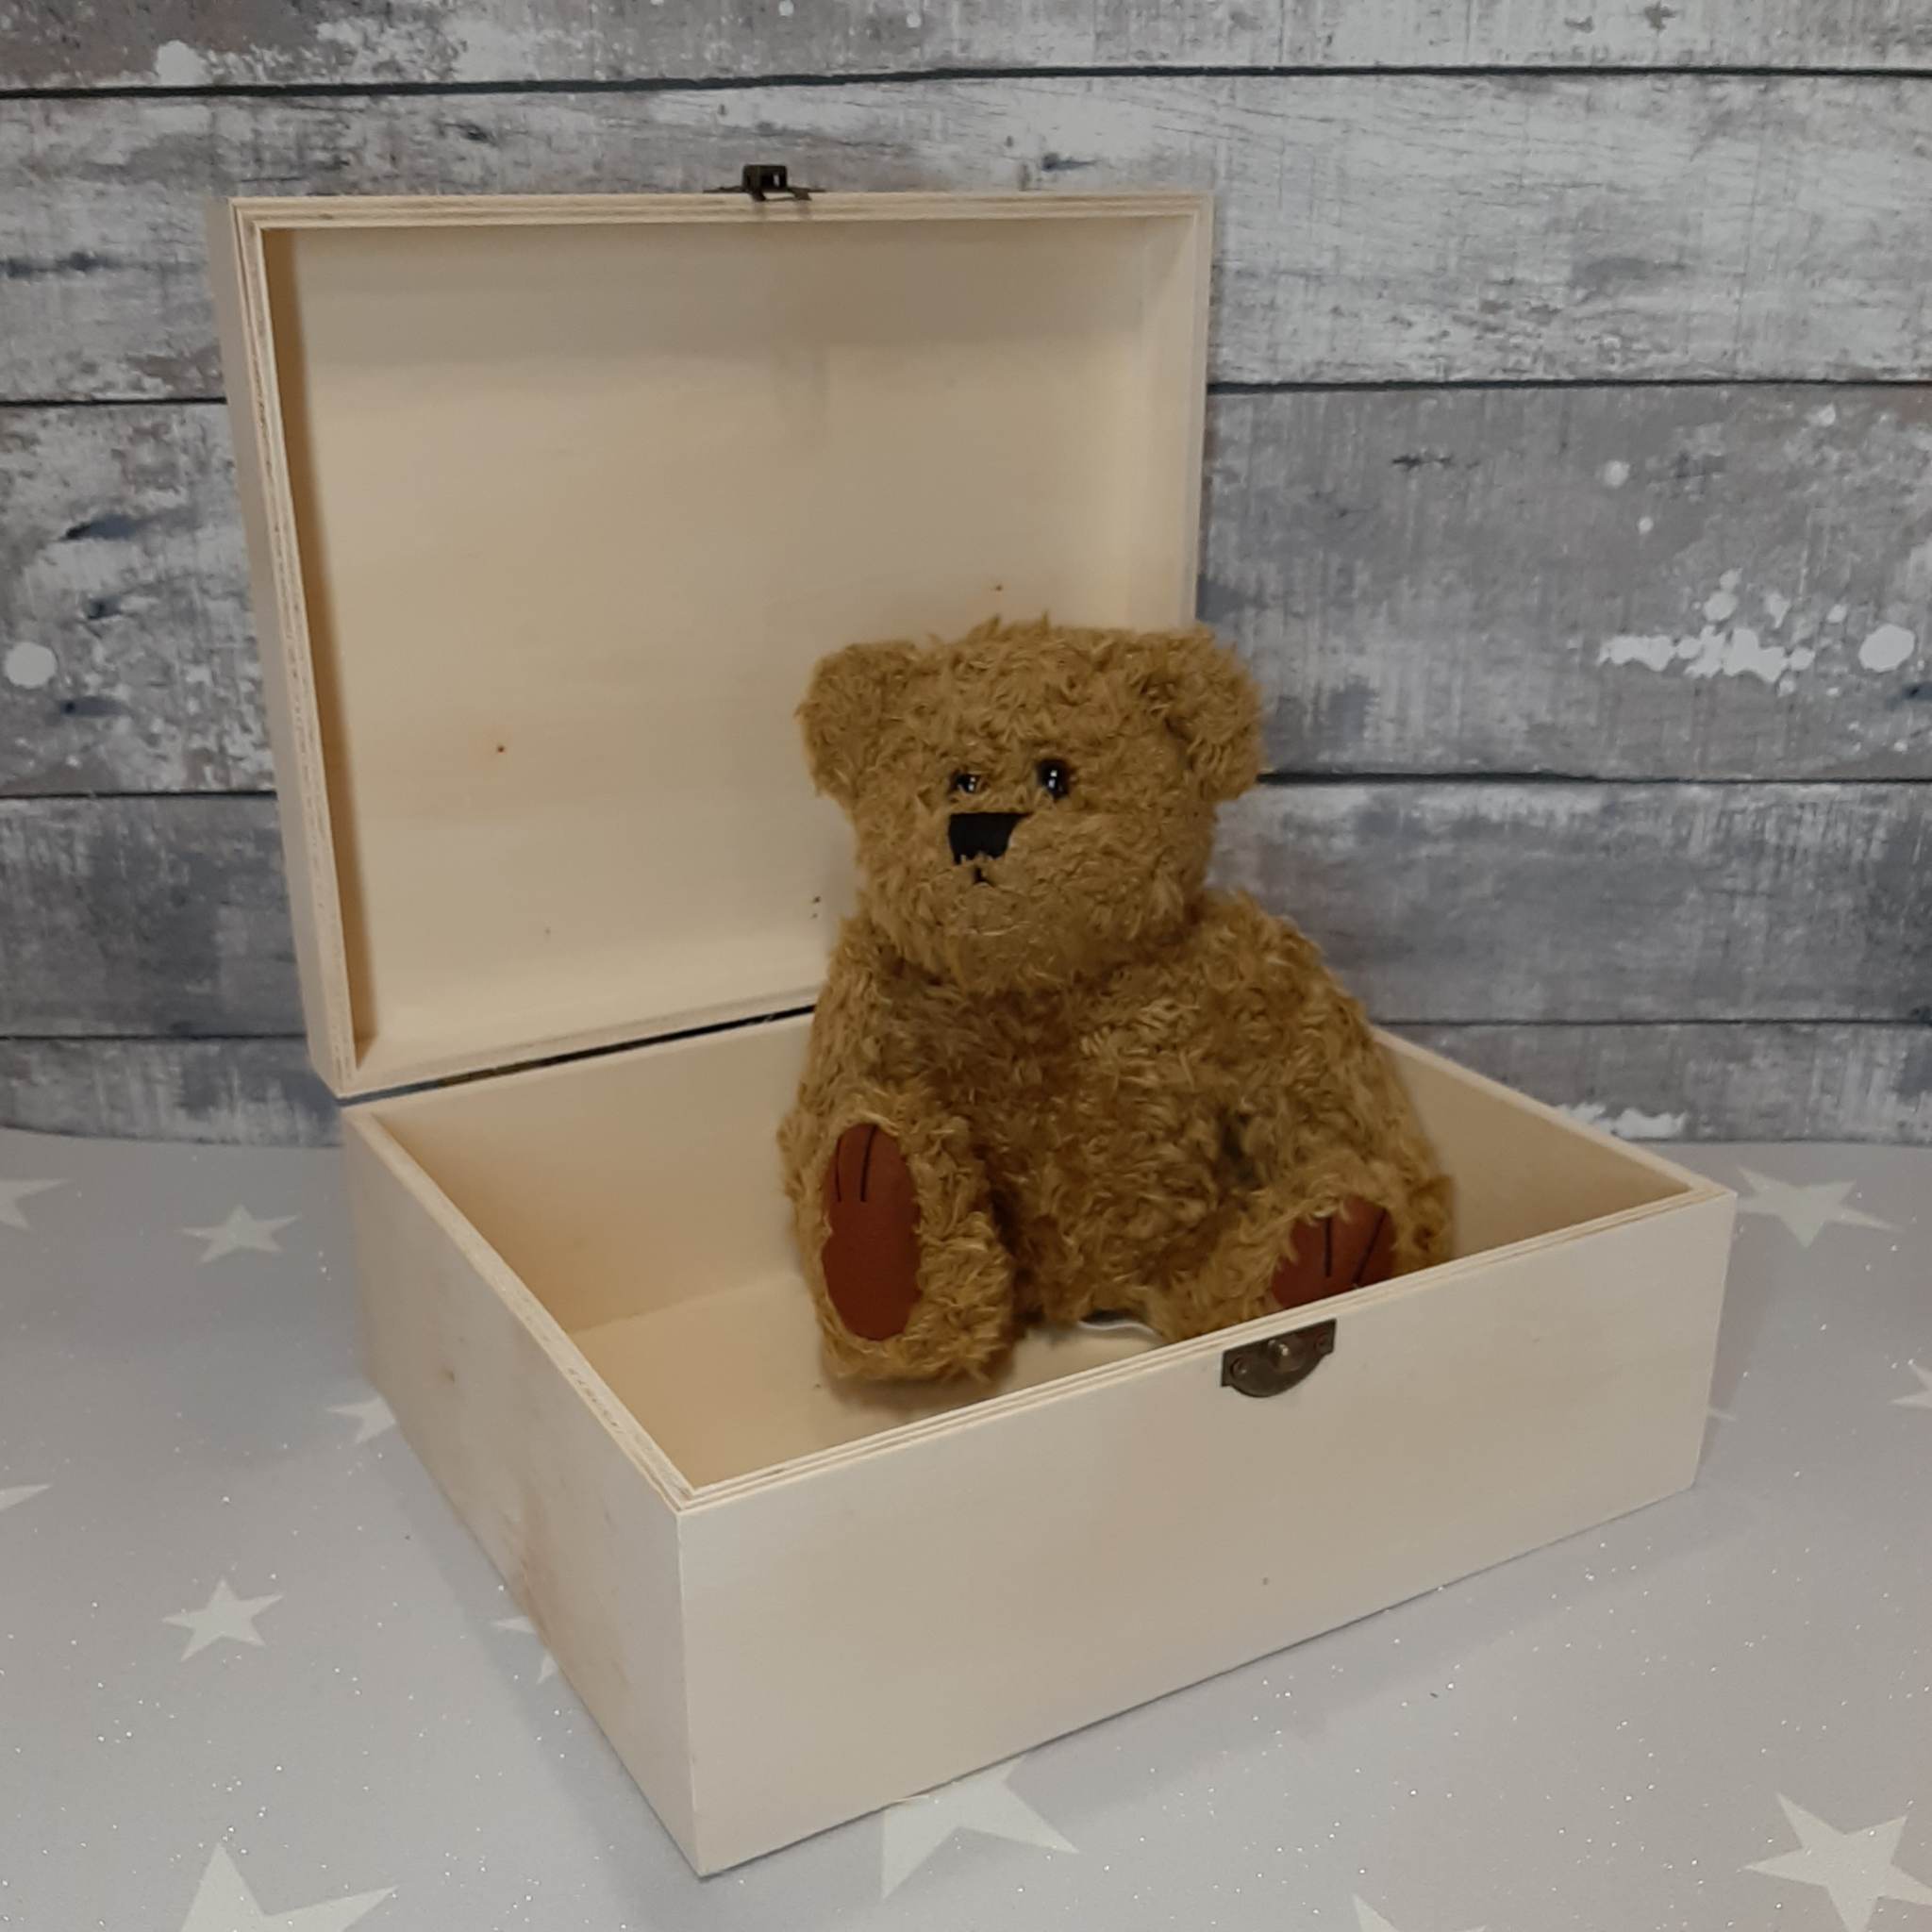 open box with teddy